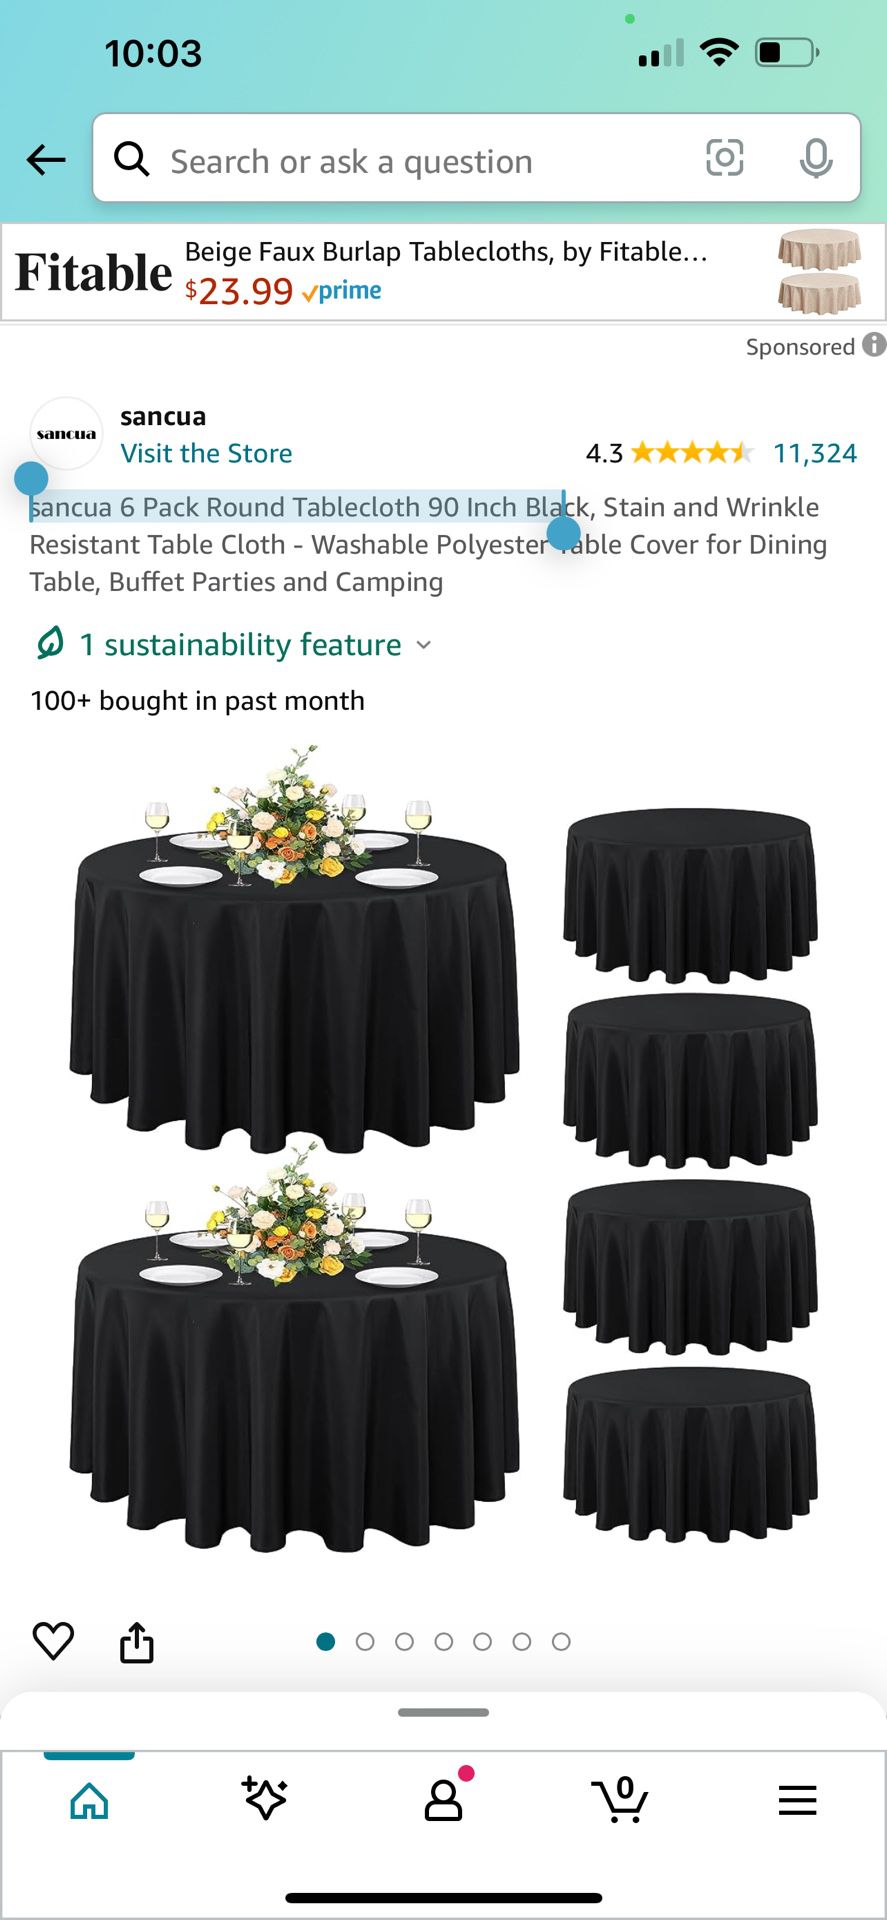 6 Pack Round Tablecloth 